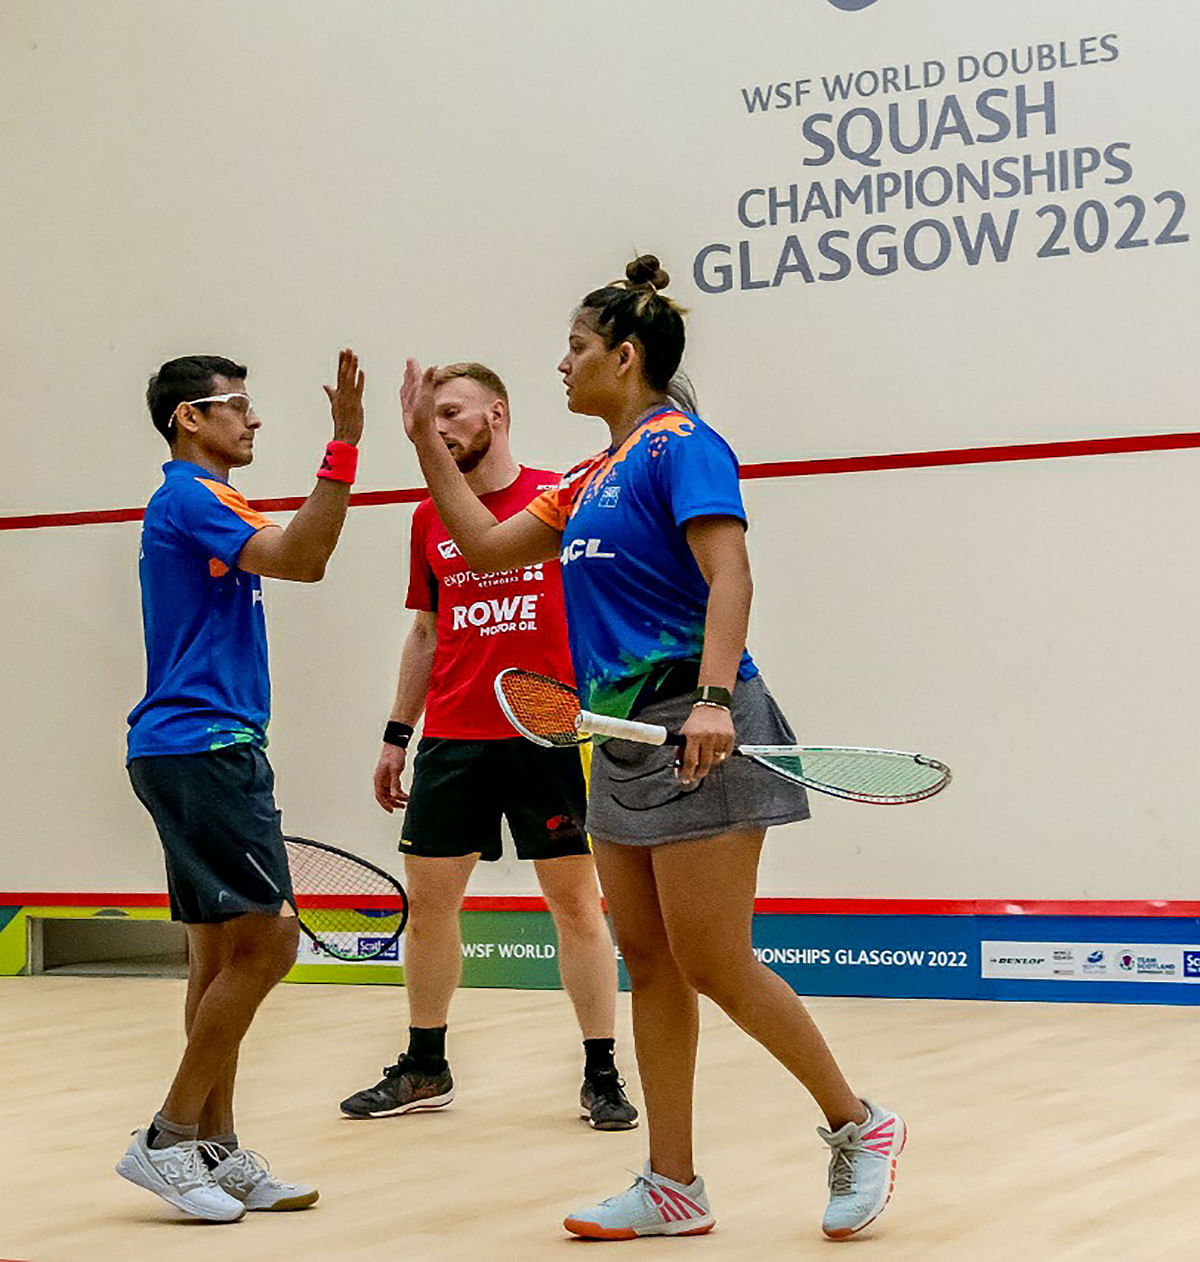 Dipika made a thundering return with a successful campaign at Glasgow with Saurav Ghosal & Joshna Chinappa. 